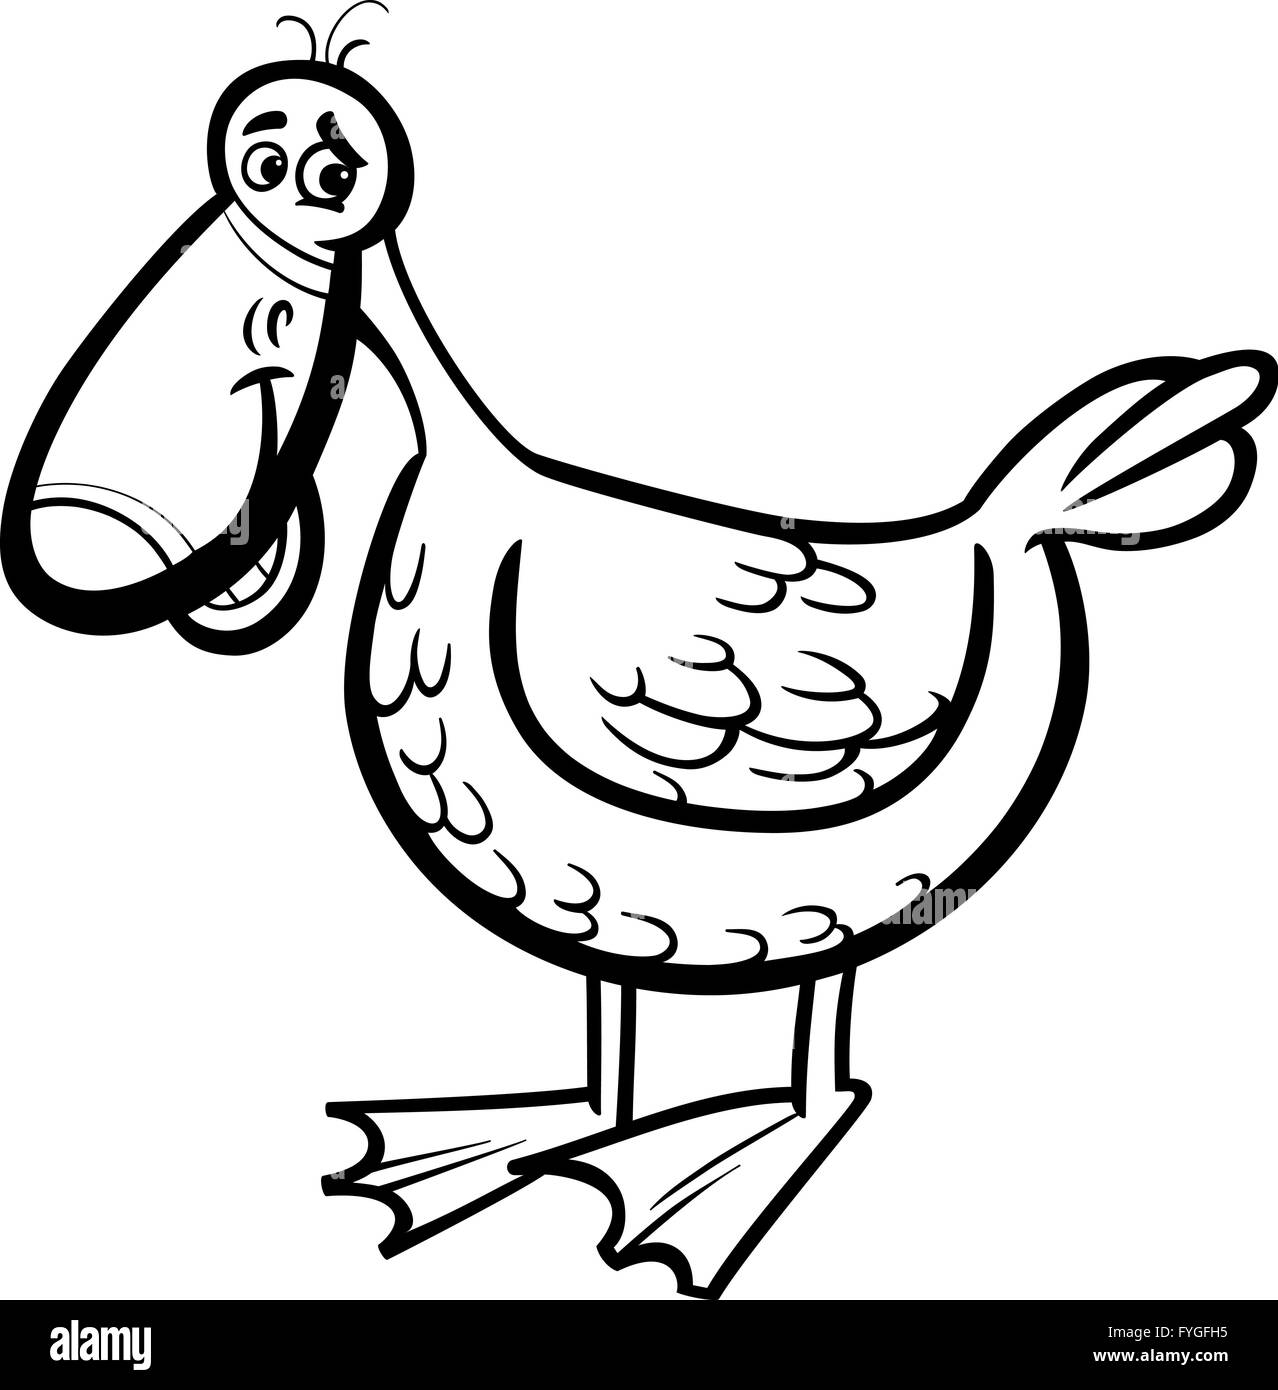 duck cartoon illustration for coloring Stock Photo